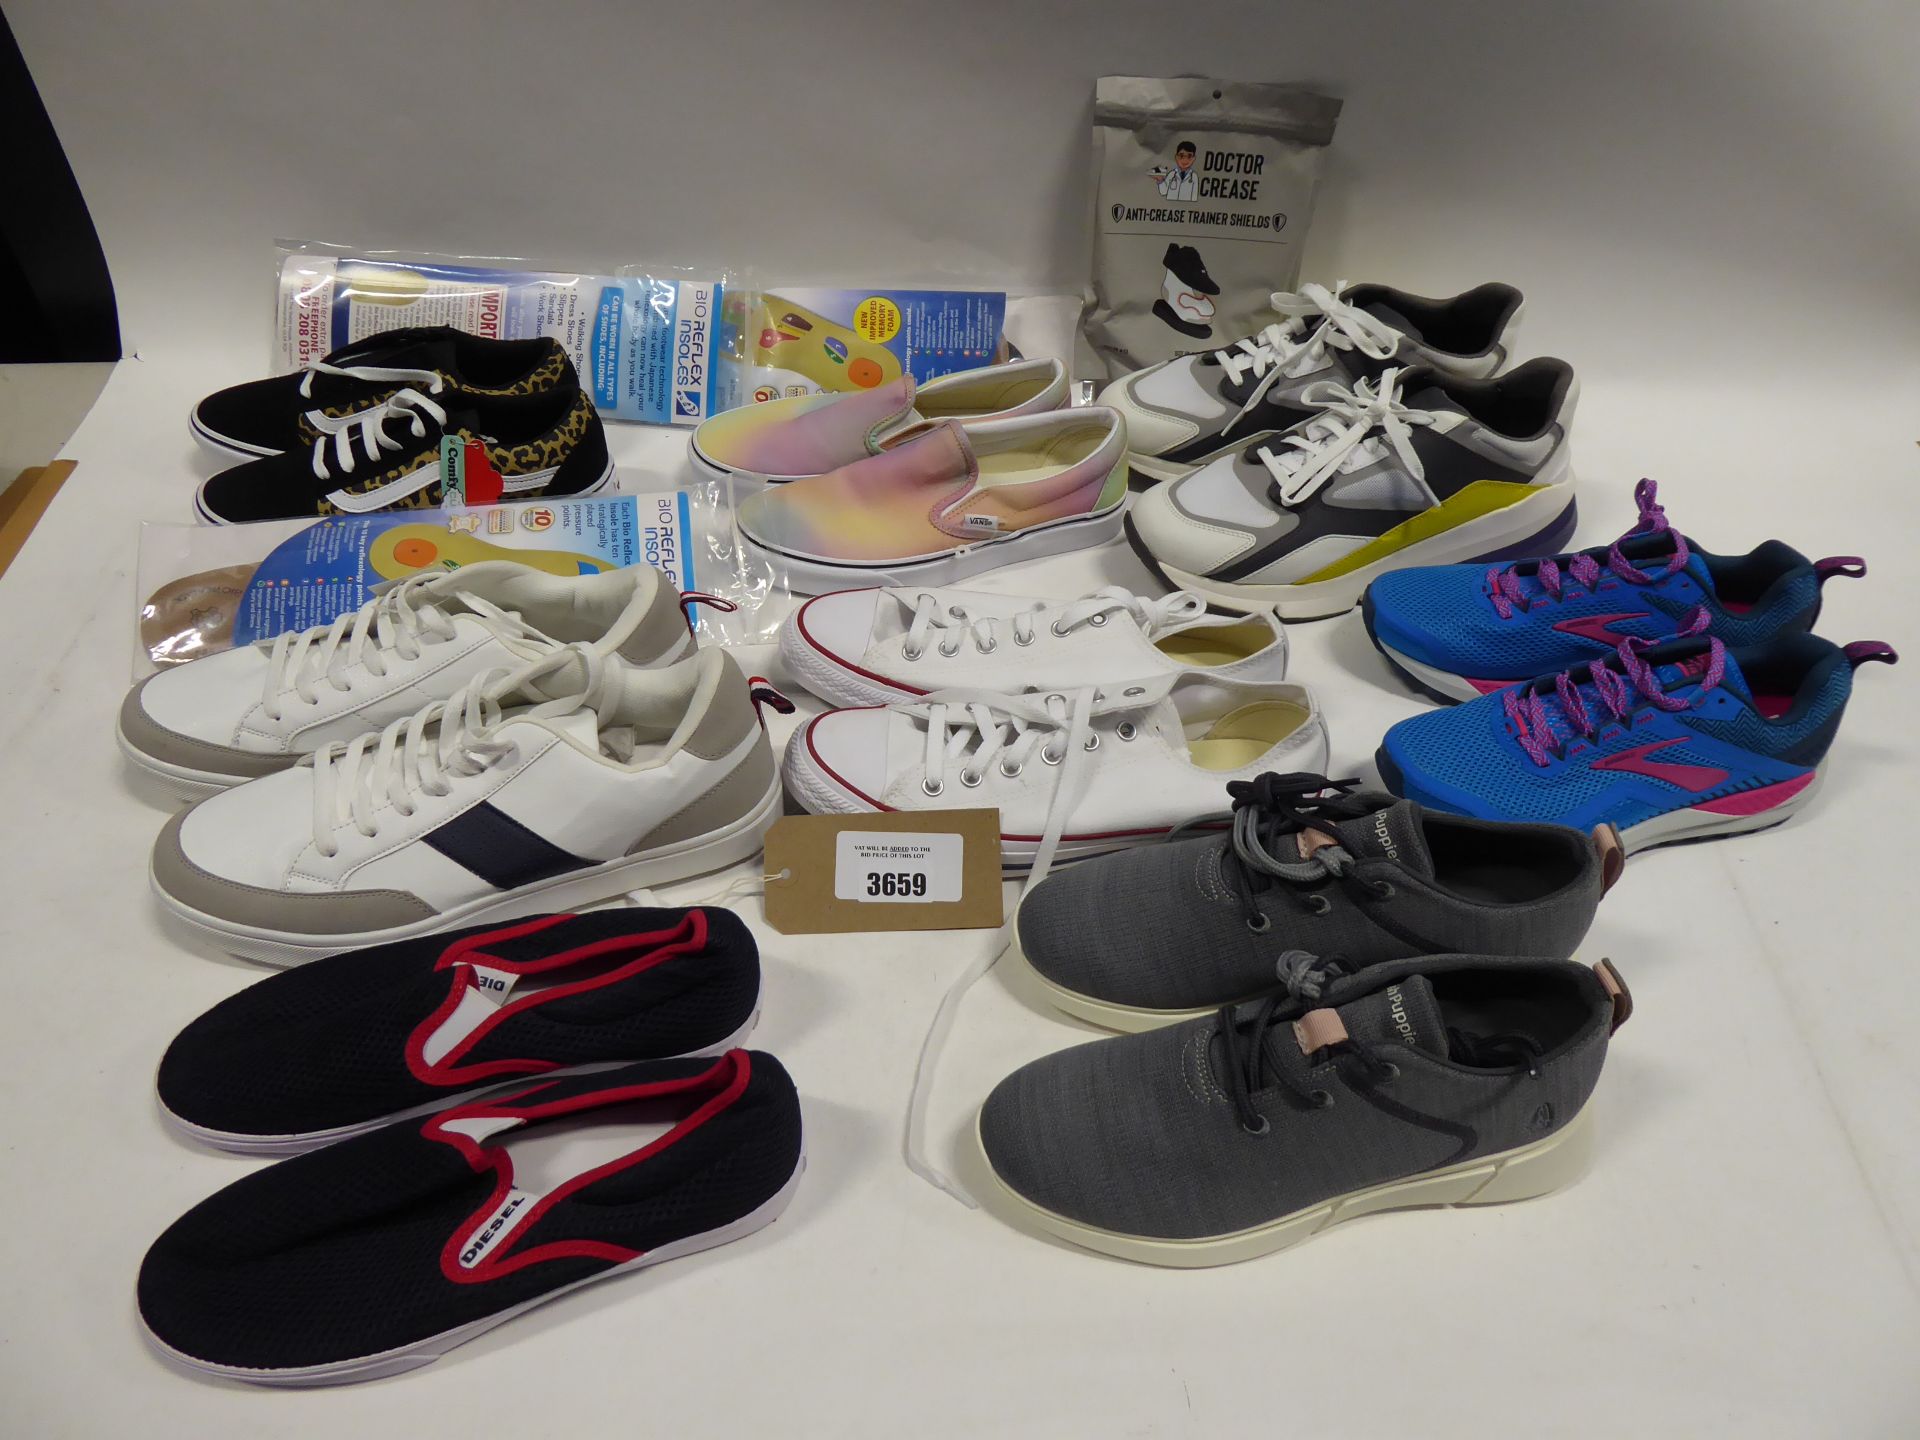 Bag of assorted trainers and footwear accessories